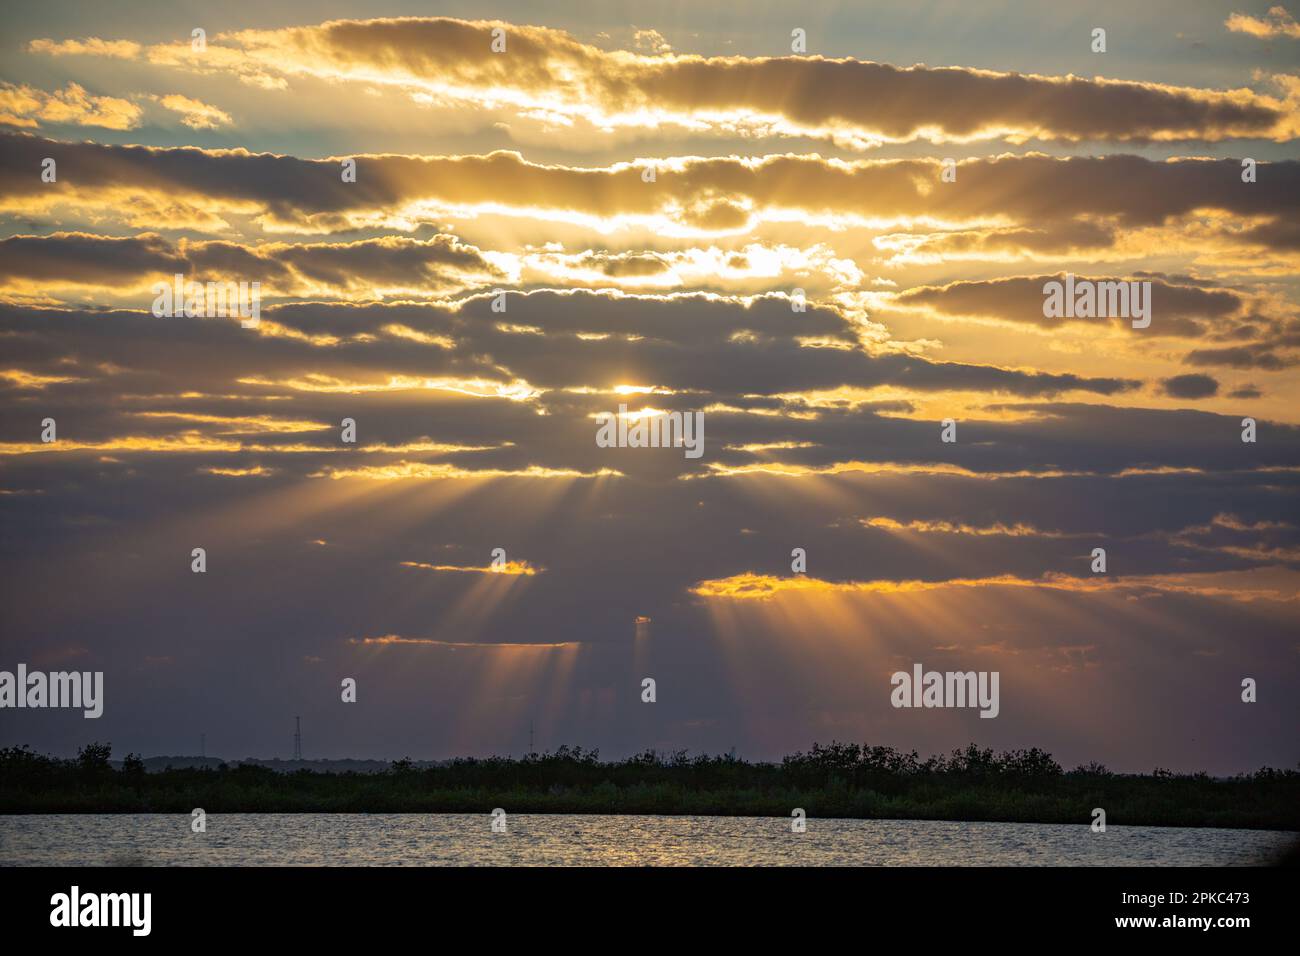 a picture of a cloudy sky and a sunset, the sun rays are glowing through the clouds. Lake and the horizon on the bottom part. Stock Photo